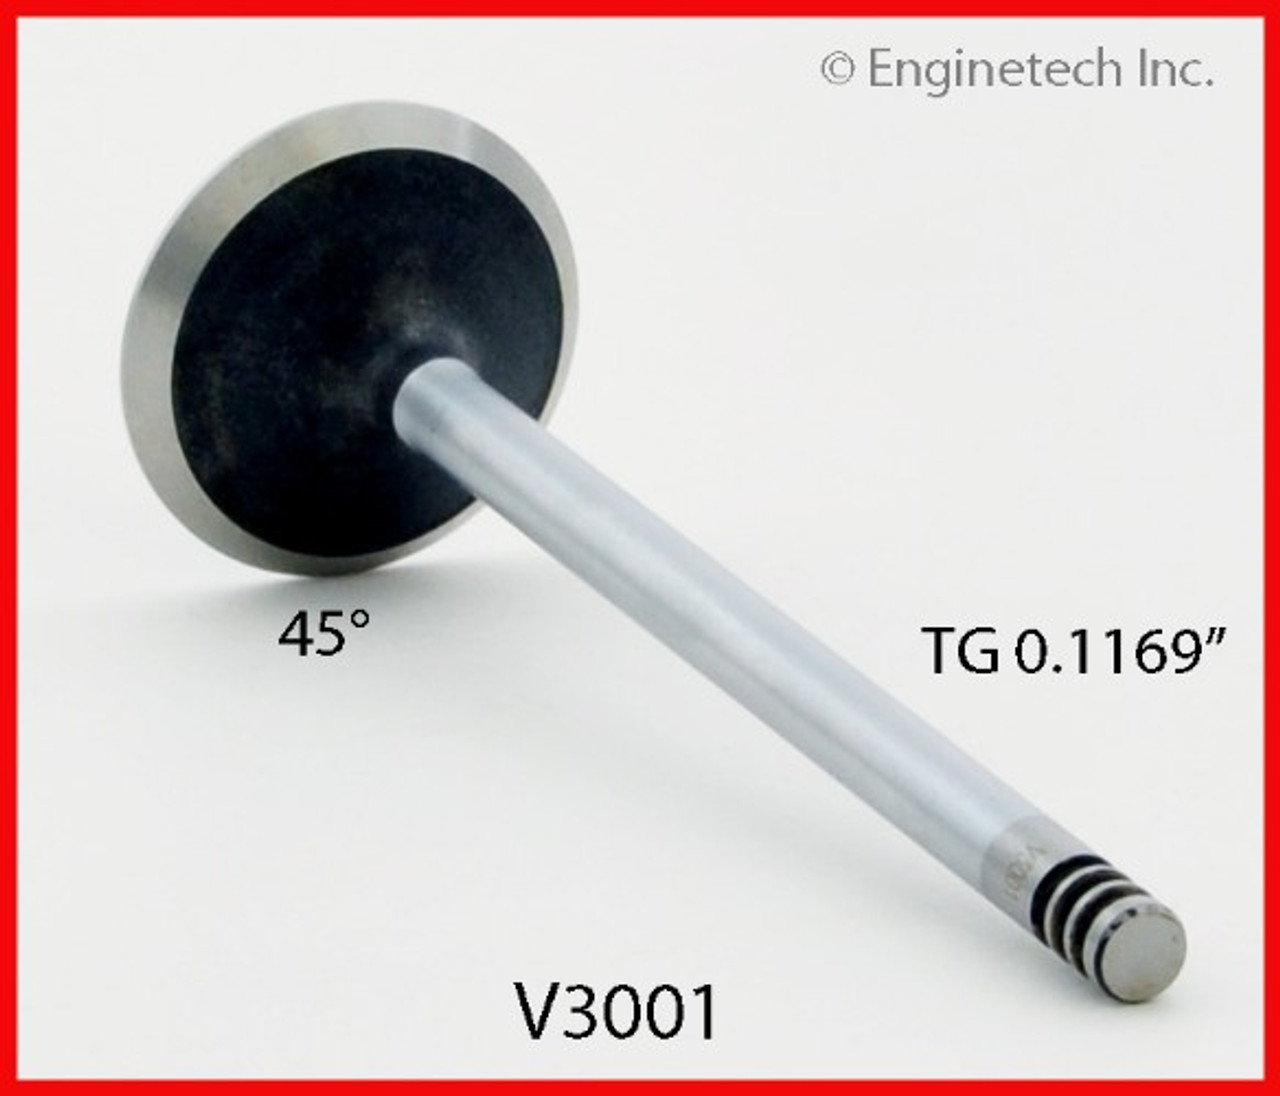 Exhaust Valve - 1997 Ford Mustang 3.8L (V3001.A9)